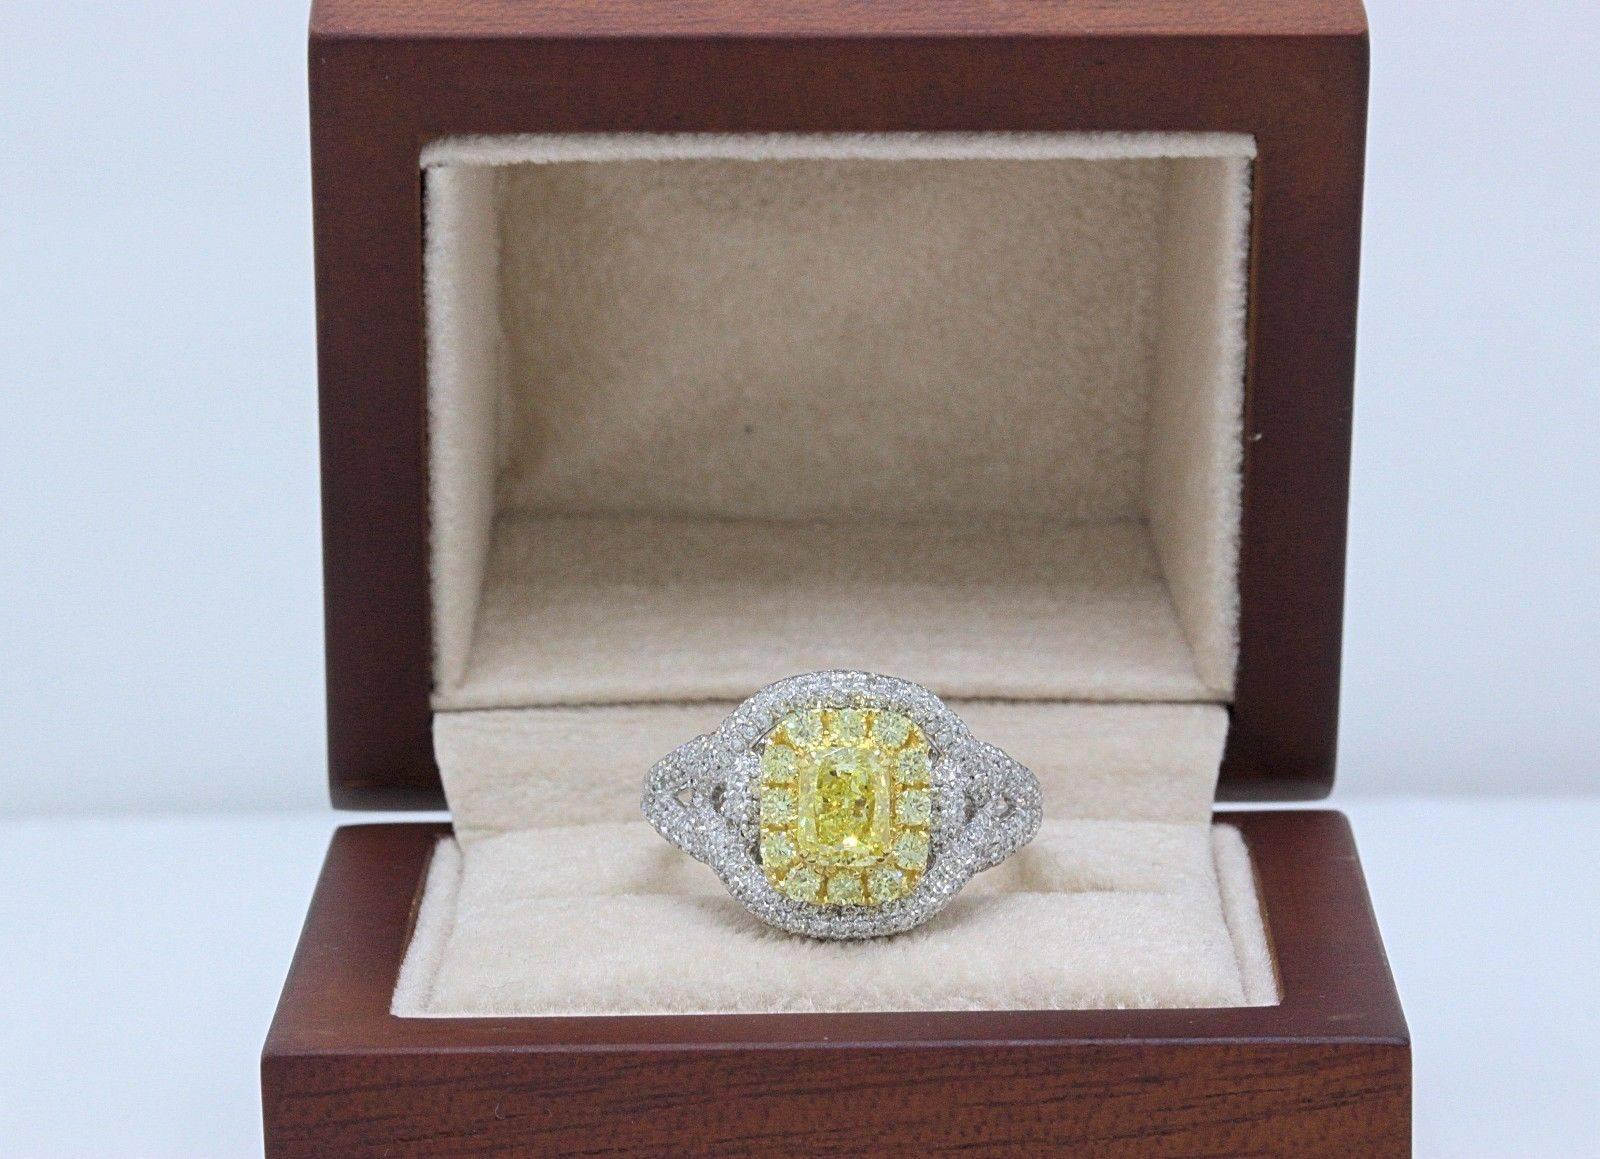 Radiant Cut Fancy Intense Yellow 2.33 Carat Diamond Engagement Ring in Platinum with GIA